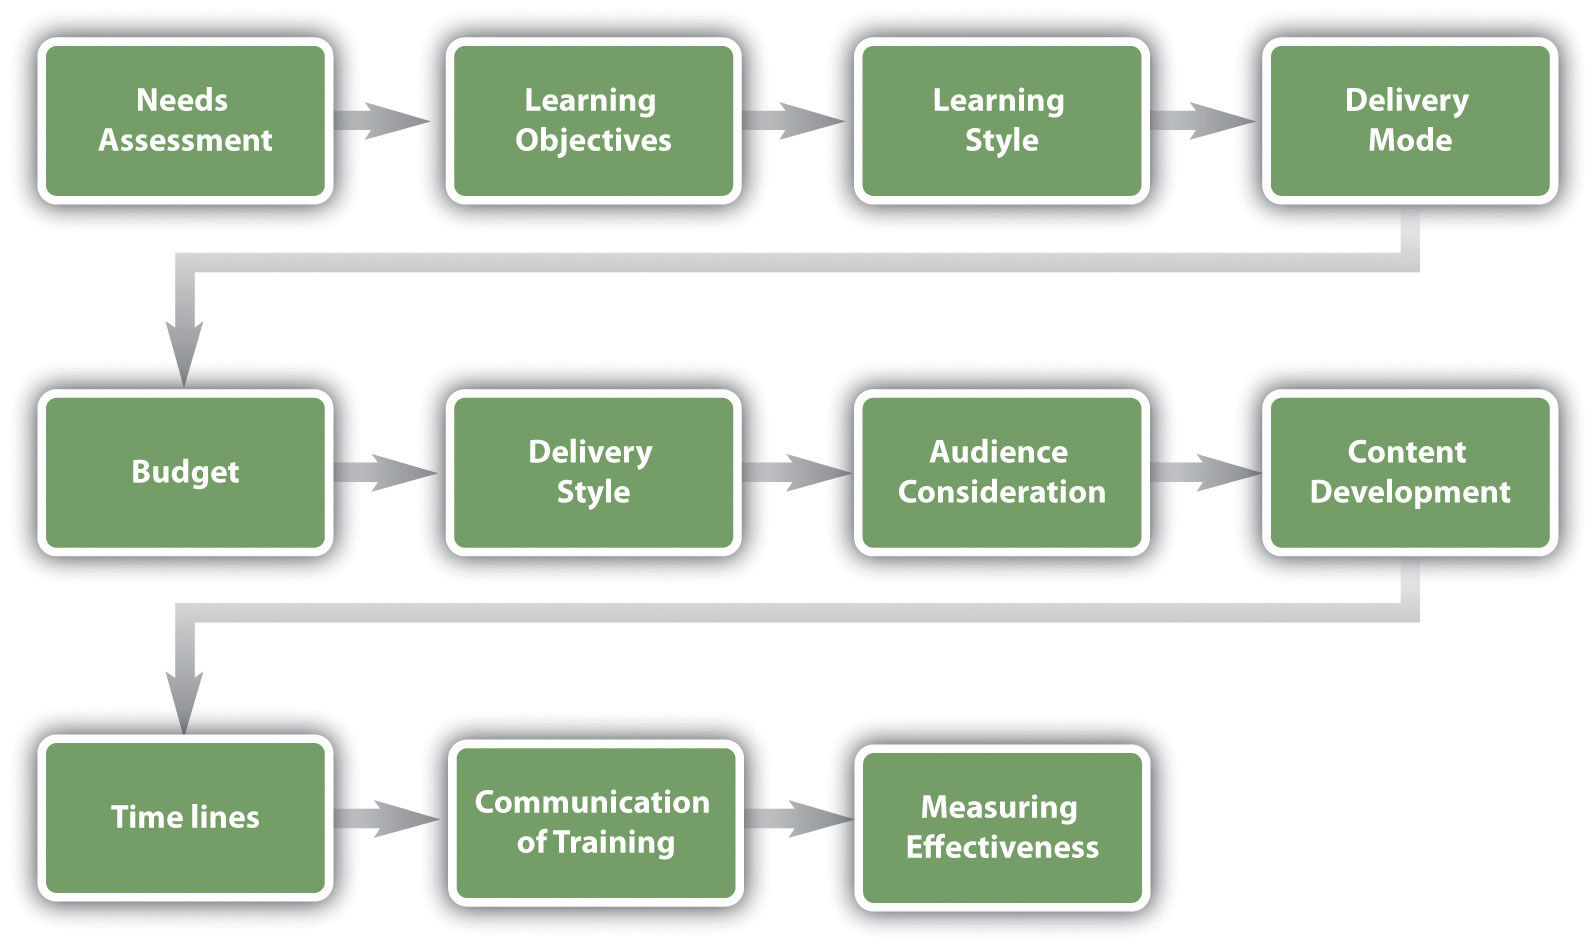 The stages of creating a course, from needs assessment to delivery mode, content development, and measuring effectiveness.